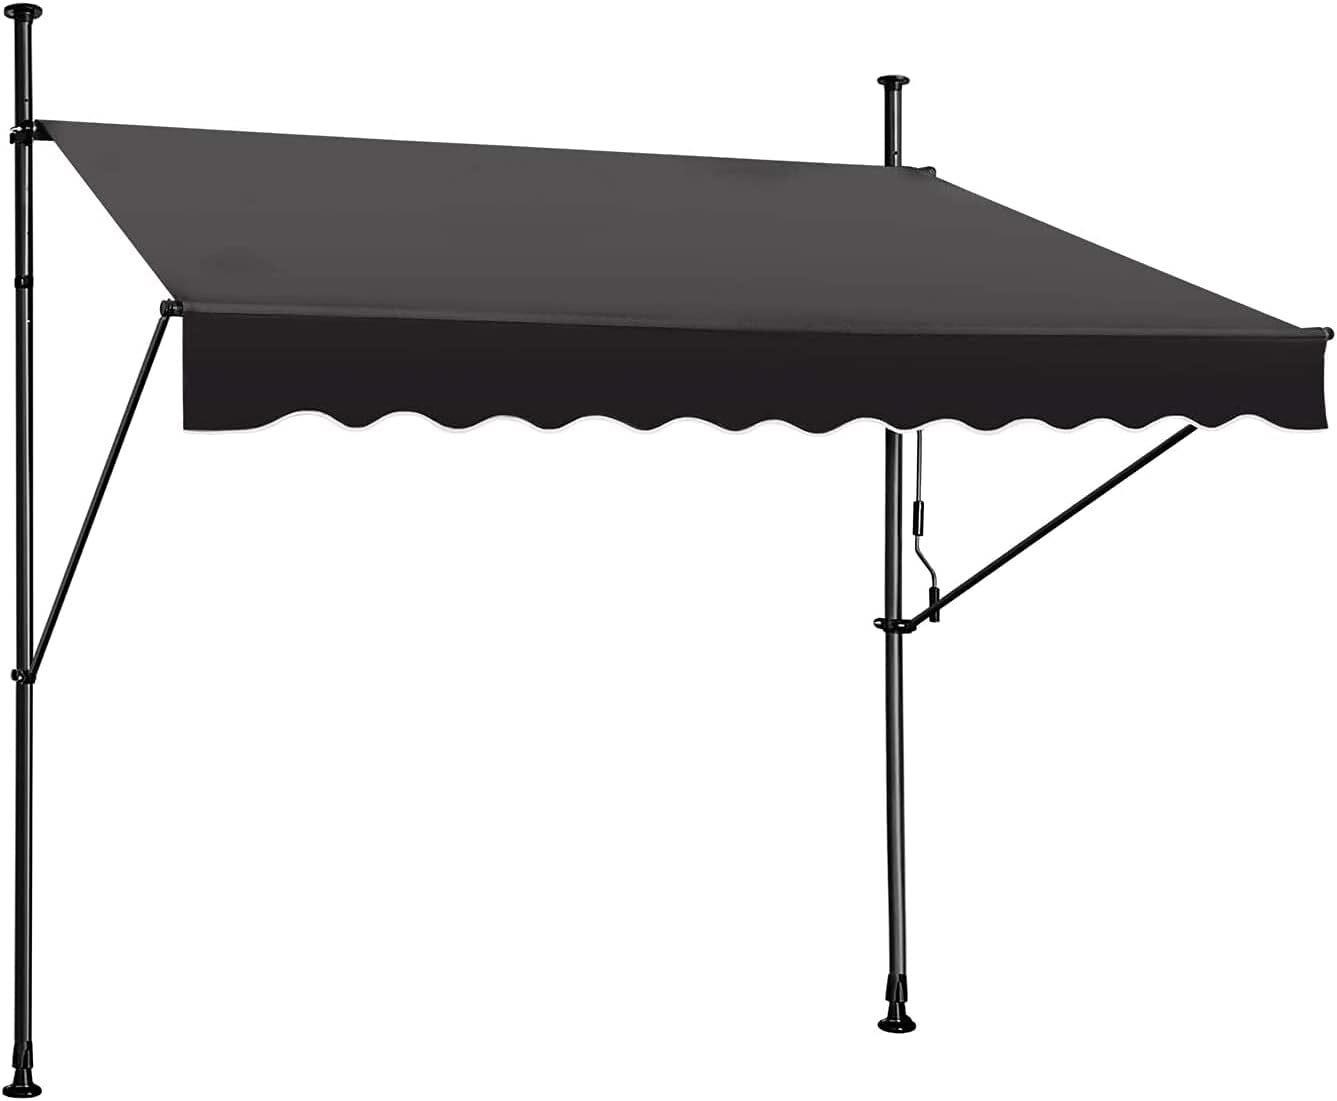 Retractable Awning 118'W  Max 57' black